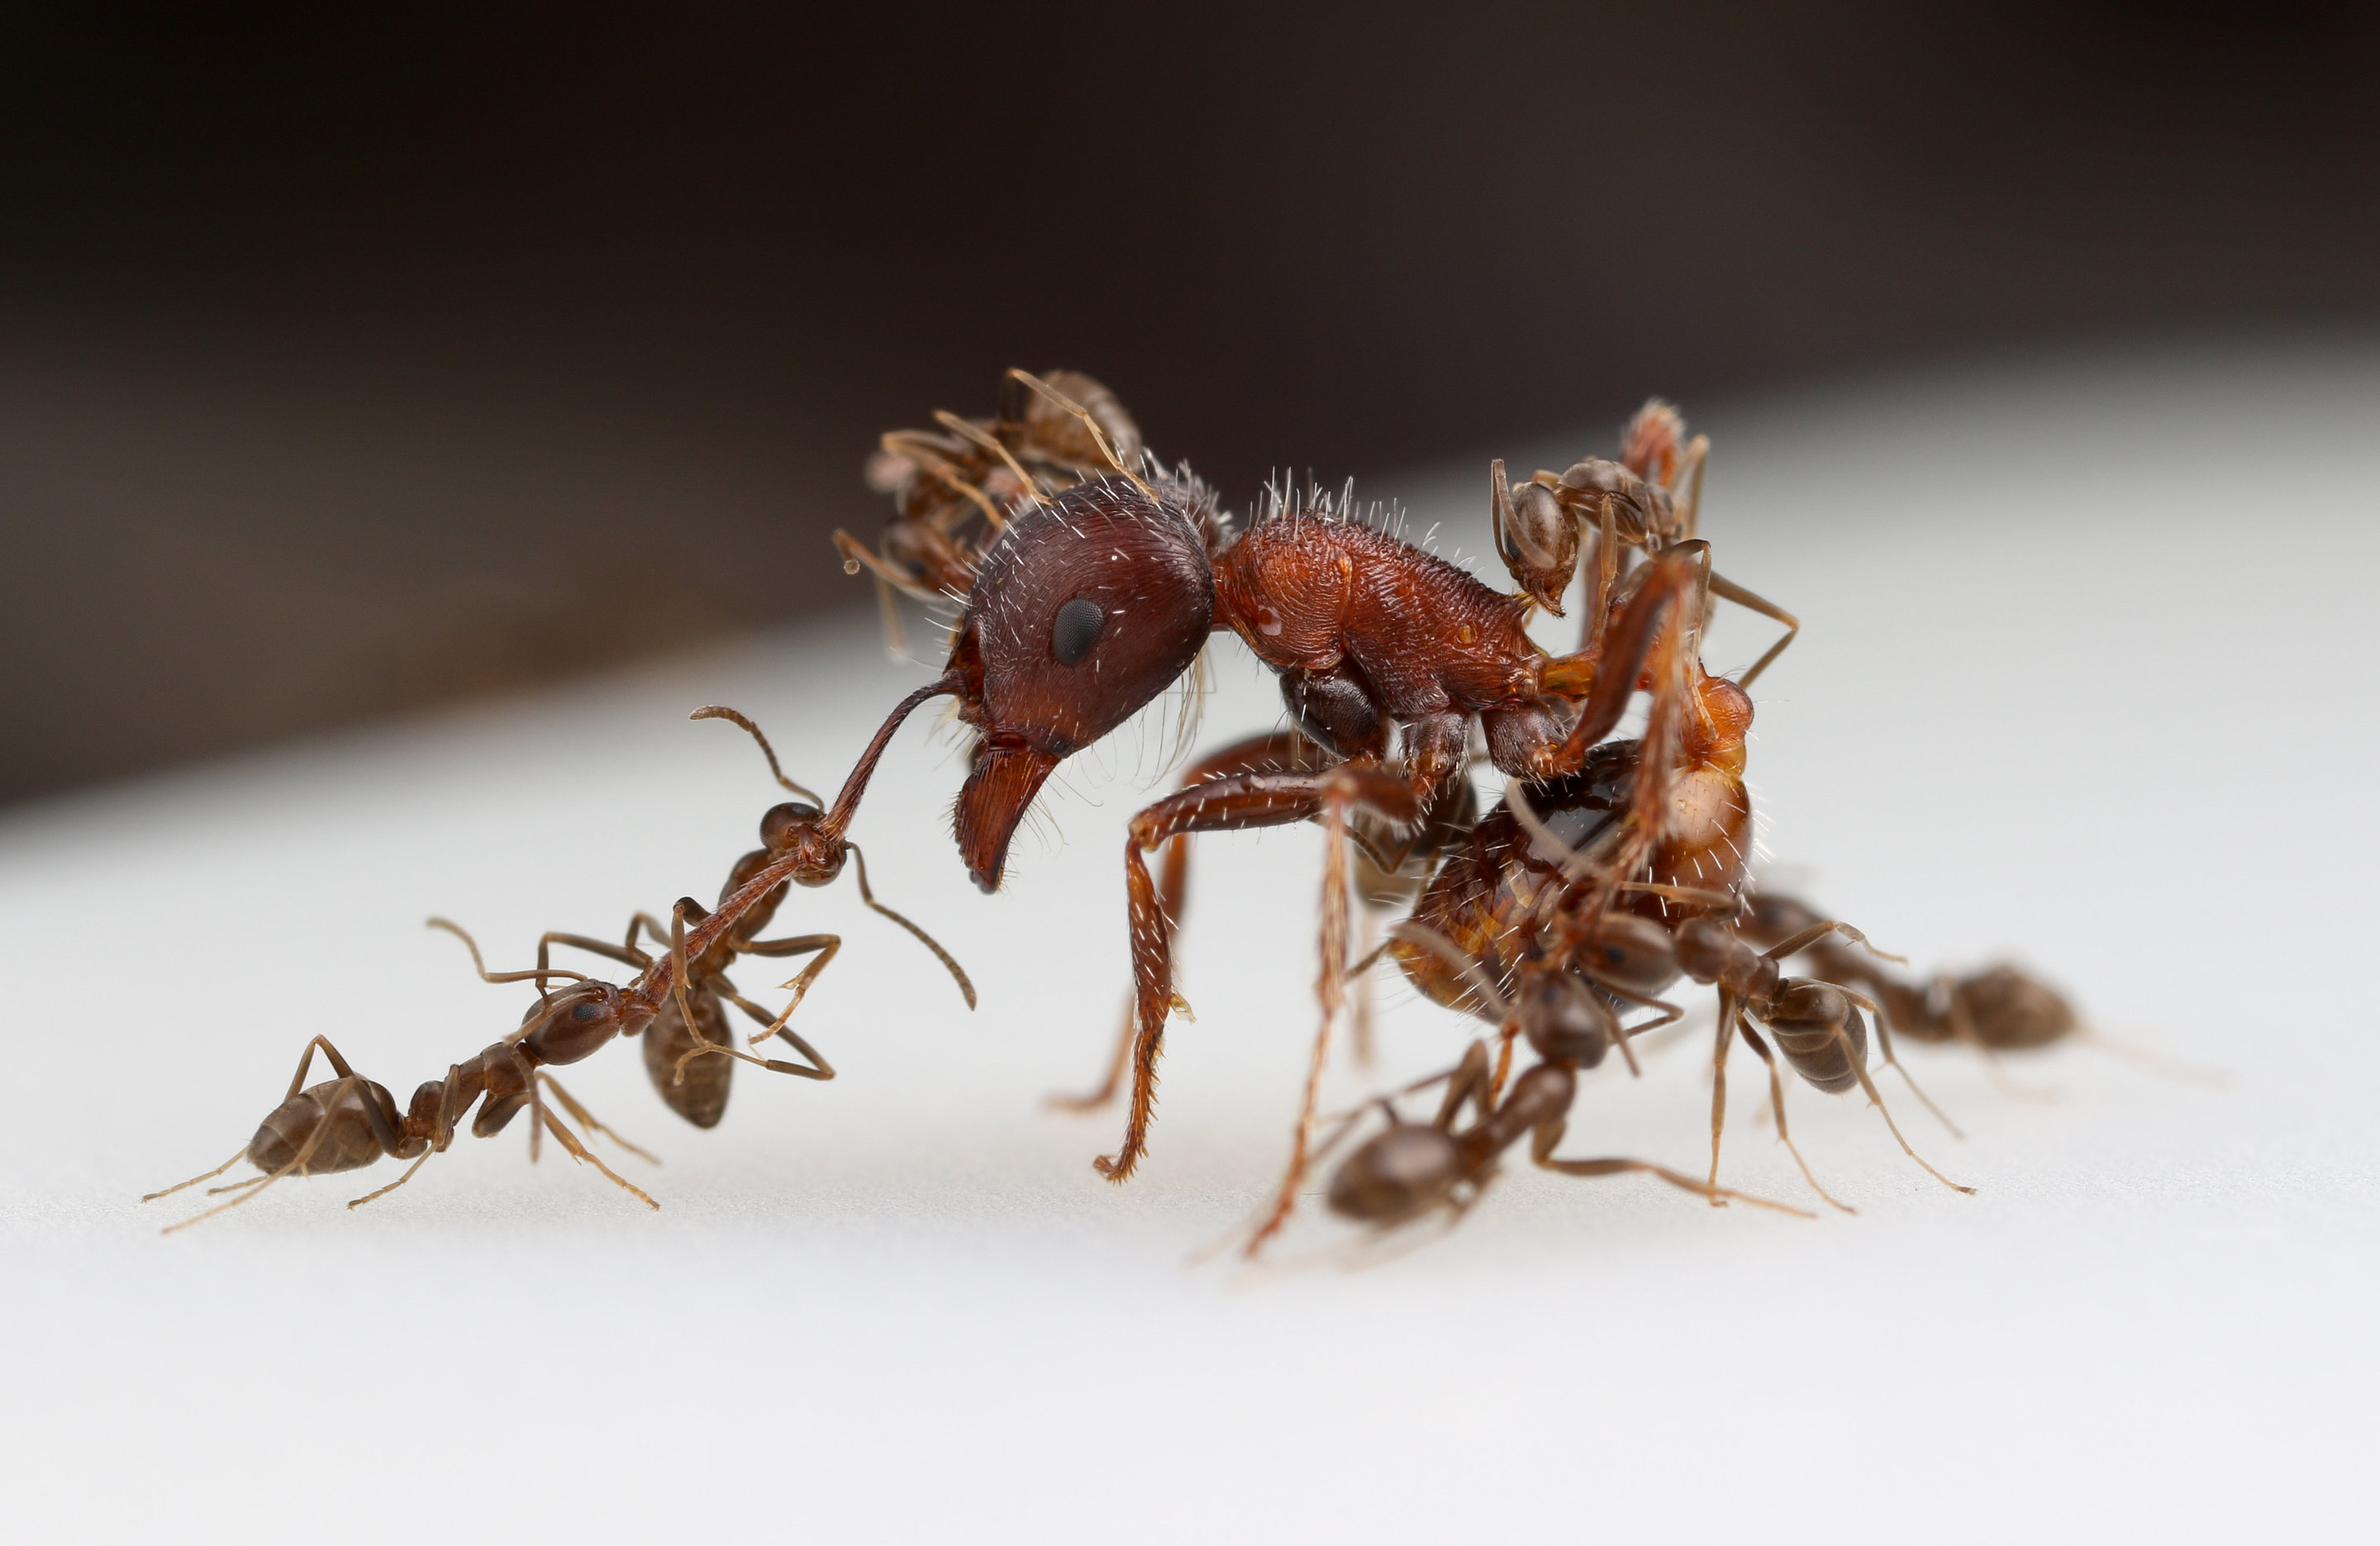 For global invasion, Argentine ants use chemical weapons